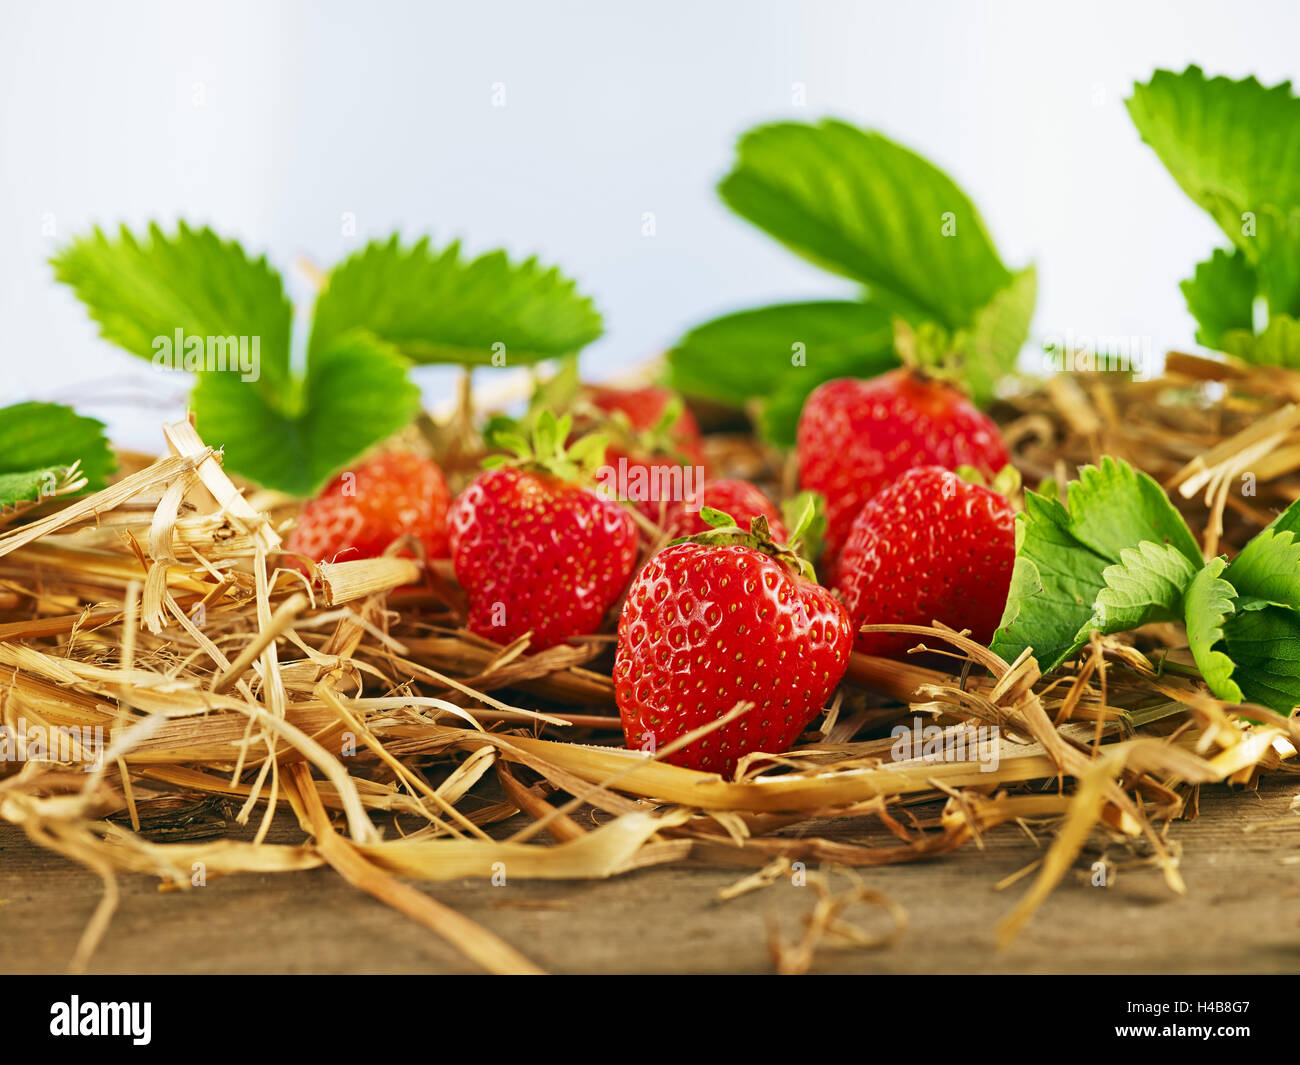 Strawberries, leaves, tabletop, wood, straw, Stock Photo